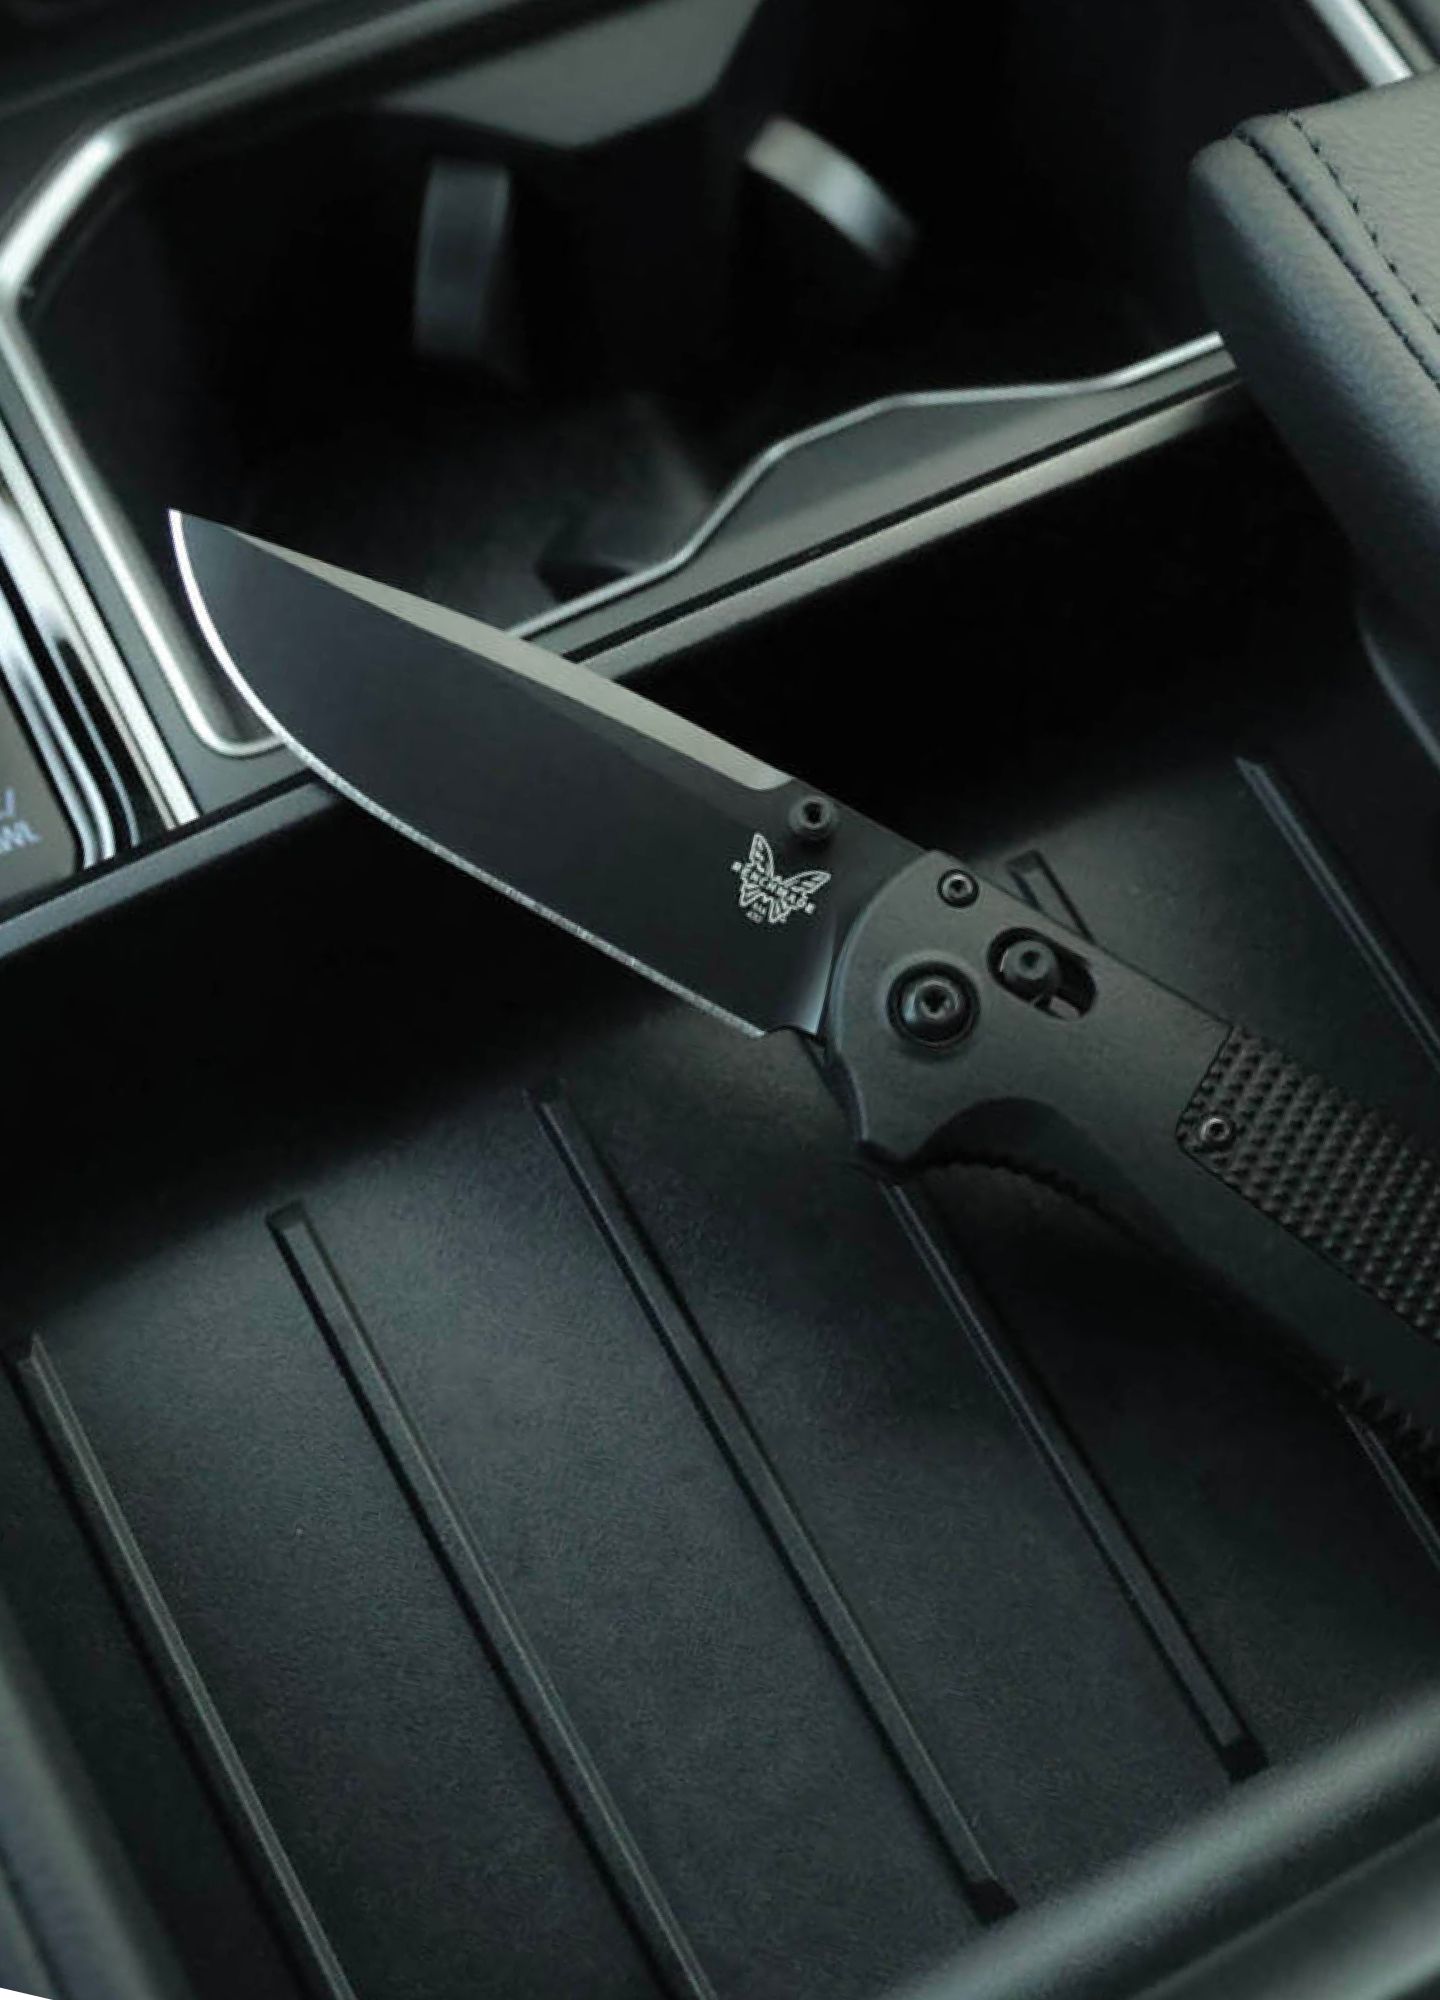 Benchmade knife sitting in car console